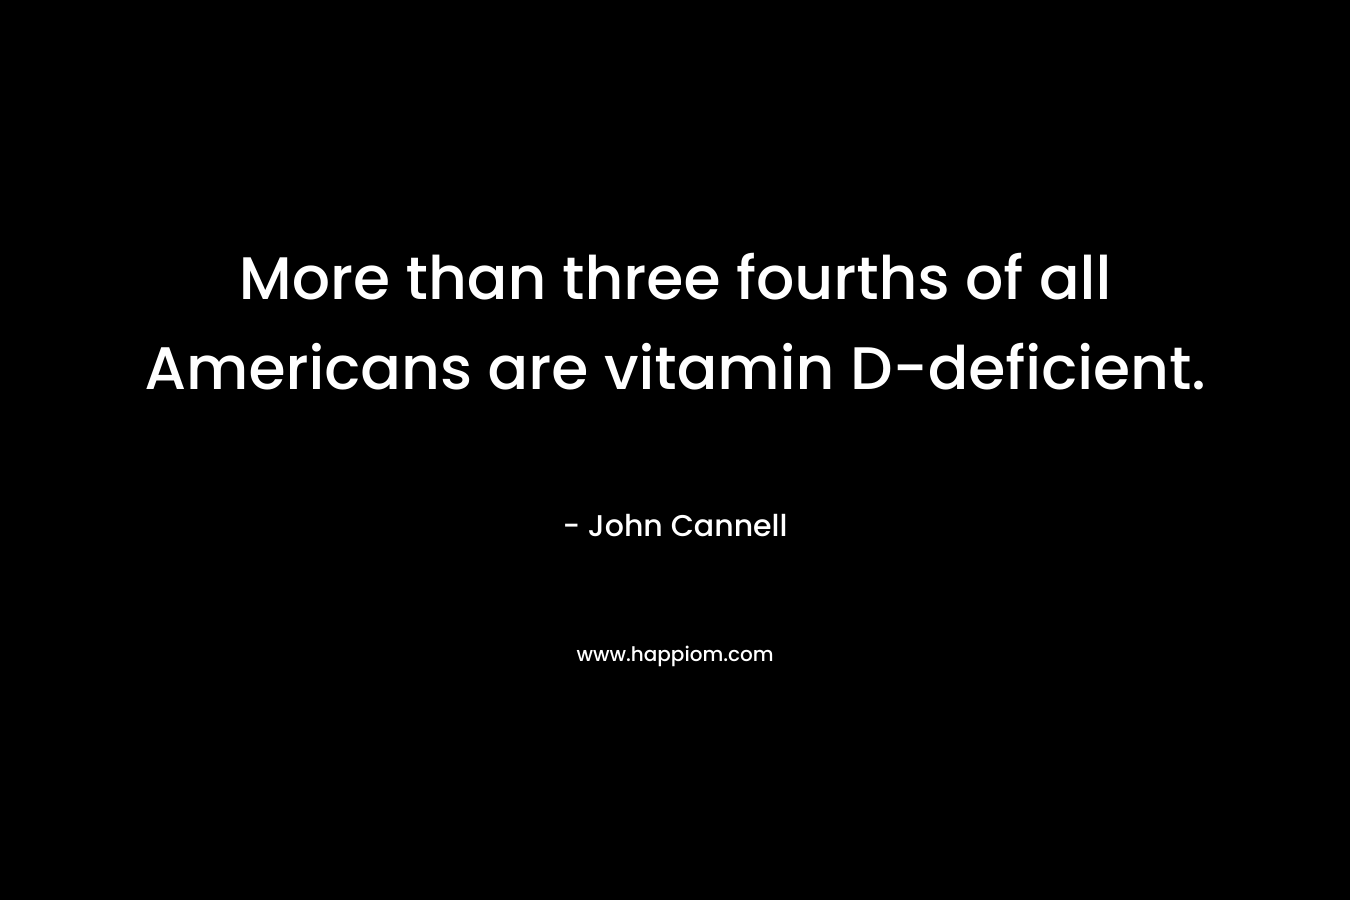 More than three fourths of all Americans are vitamin D-deficient.